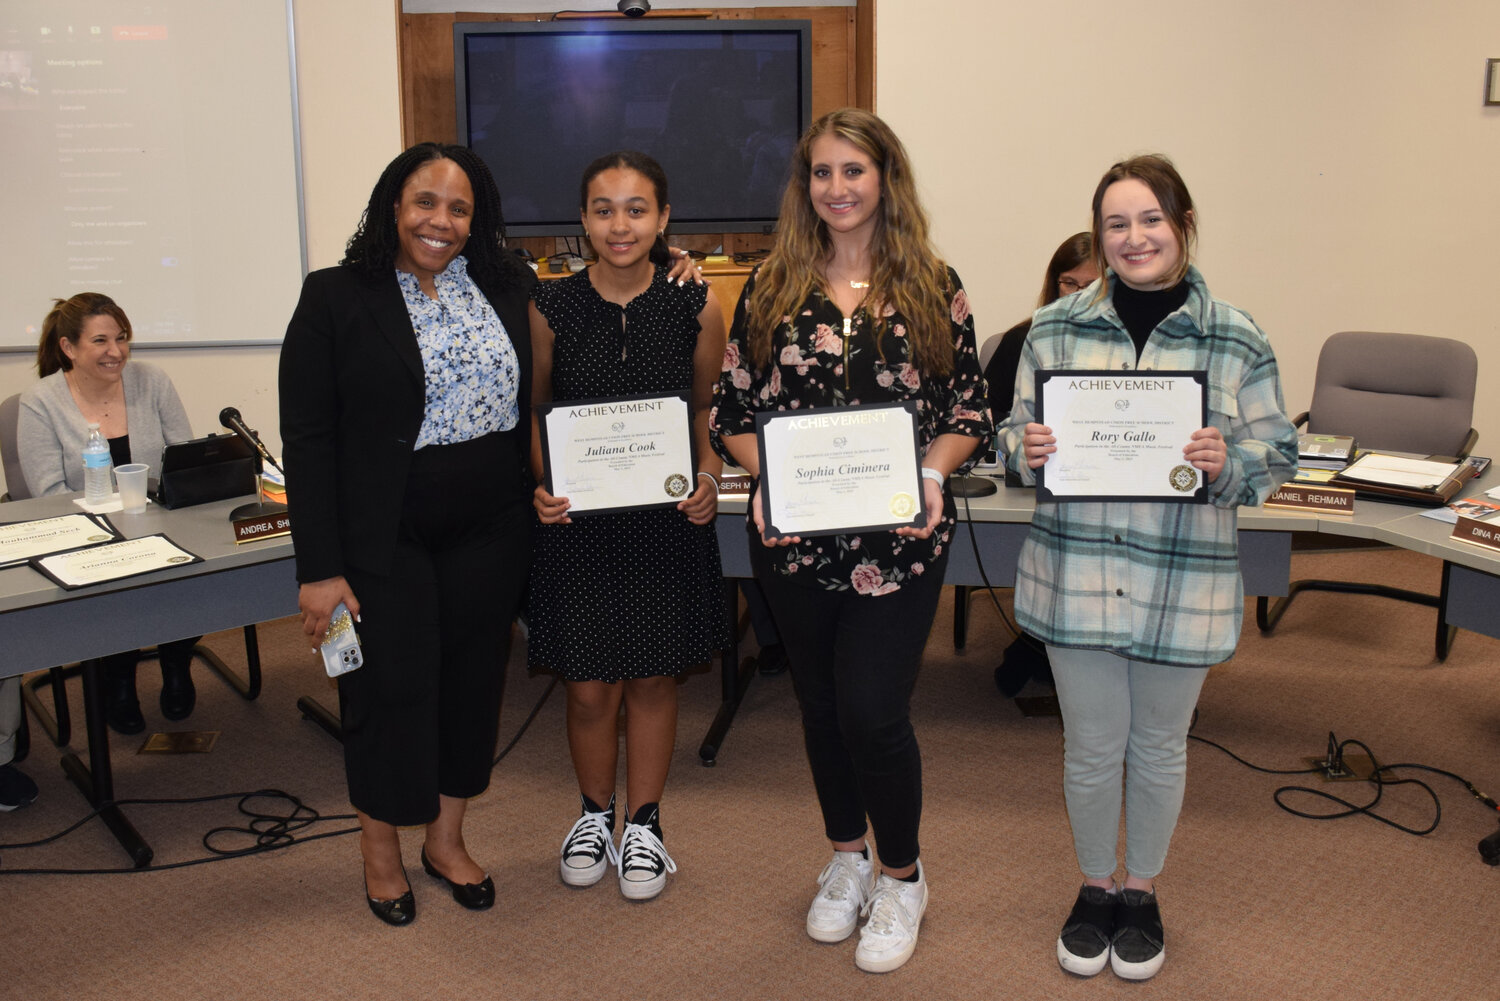 West Hempstead Secondary School students Juliana Cook, second from left, Sophia Ciminera and Rory Gallo were recognized by the district’s board of education for participating in the Nassau Music Educators Association’s All-County ensembles. Also pictured is Laila Sales, the district’s director of fine, performing and culinary arts.